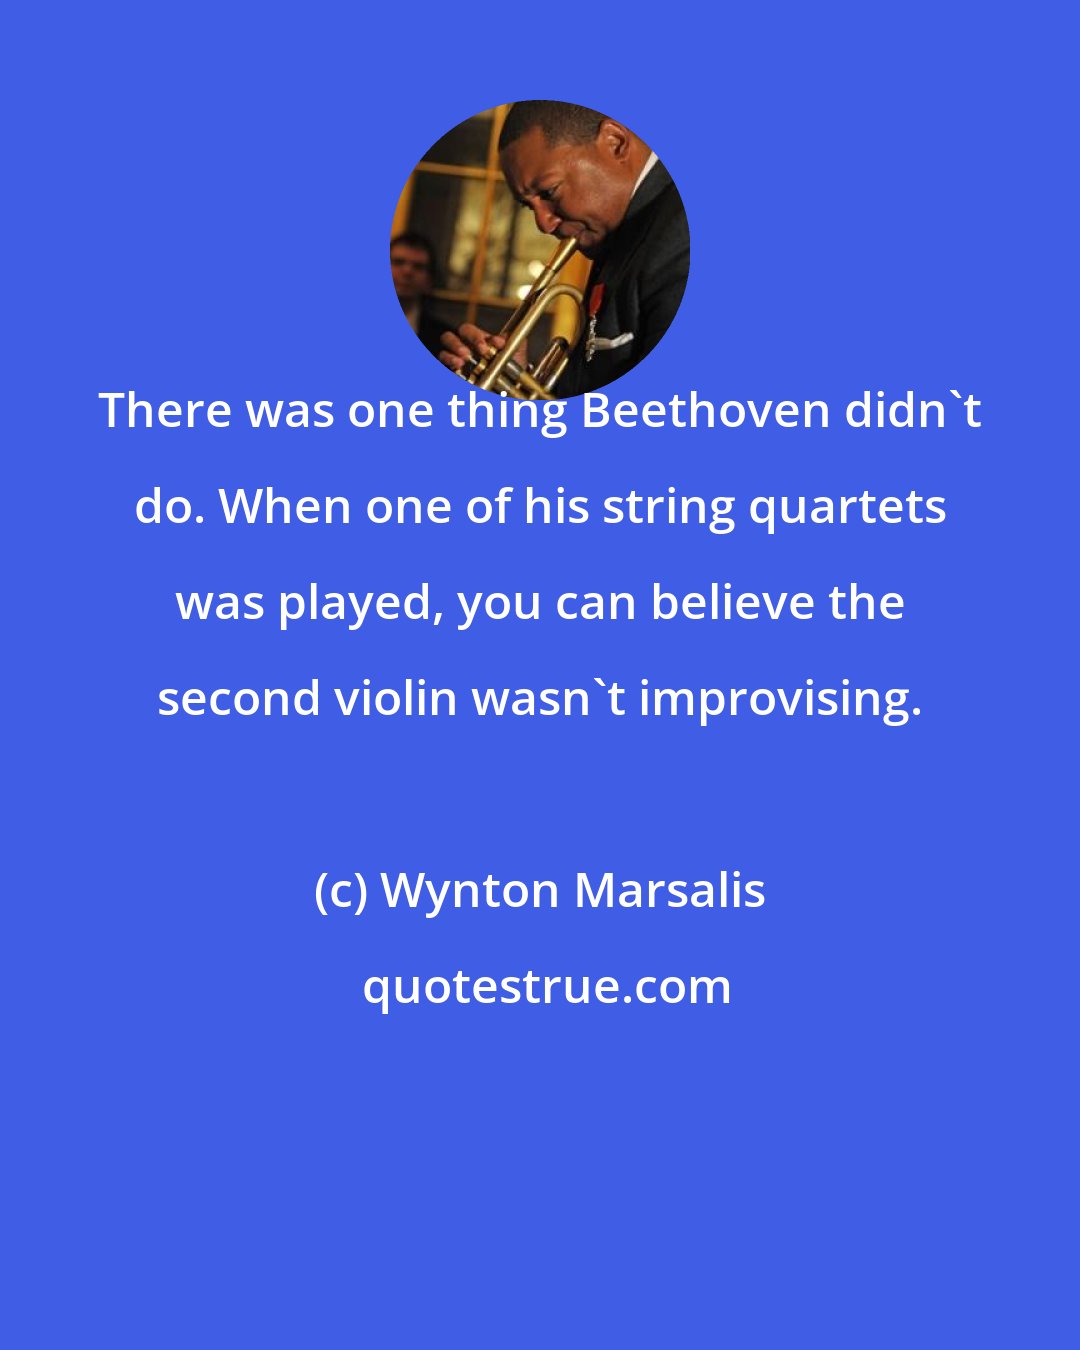 Wynton Marsalis: There was one thing Beethoven didn't do. When one of his string quartets was played, you can believe the second violin wasn't improvising.